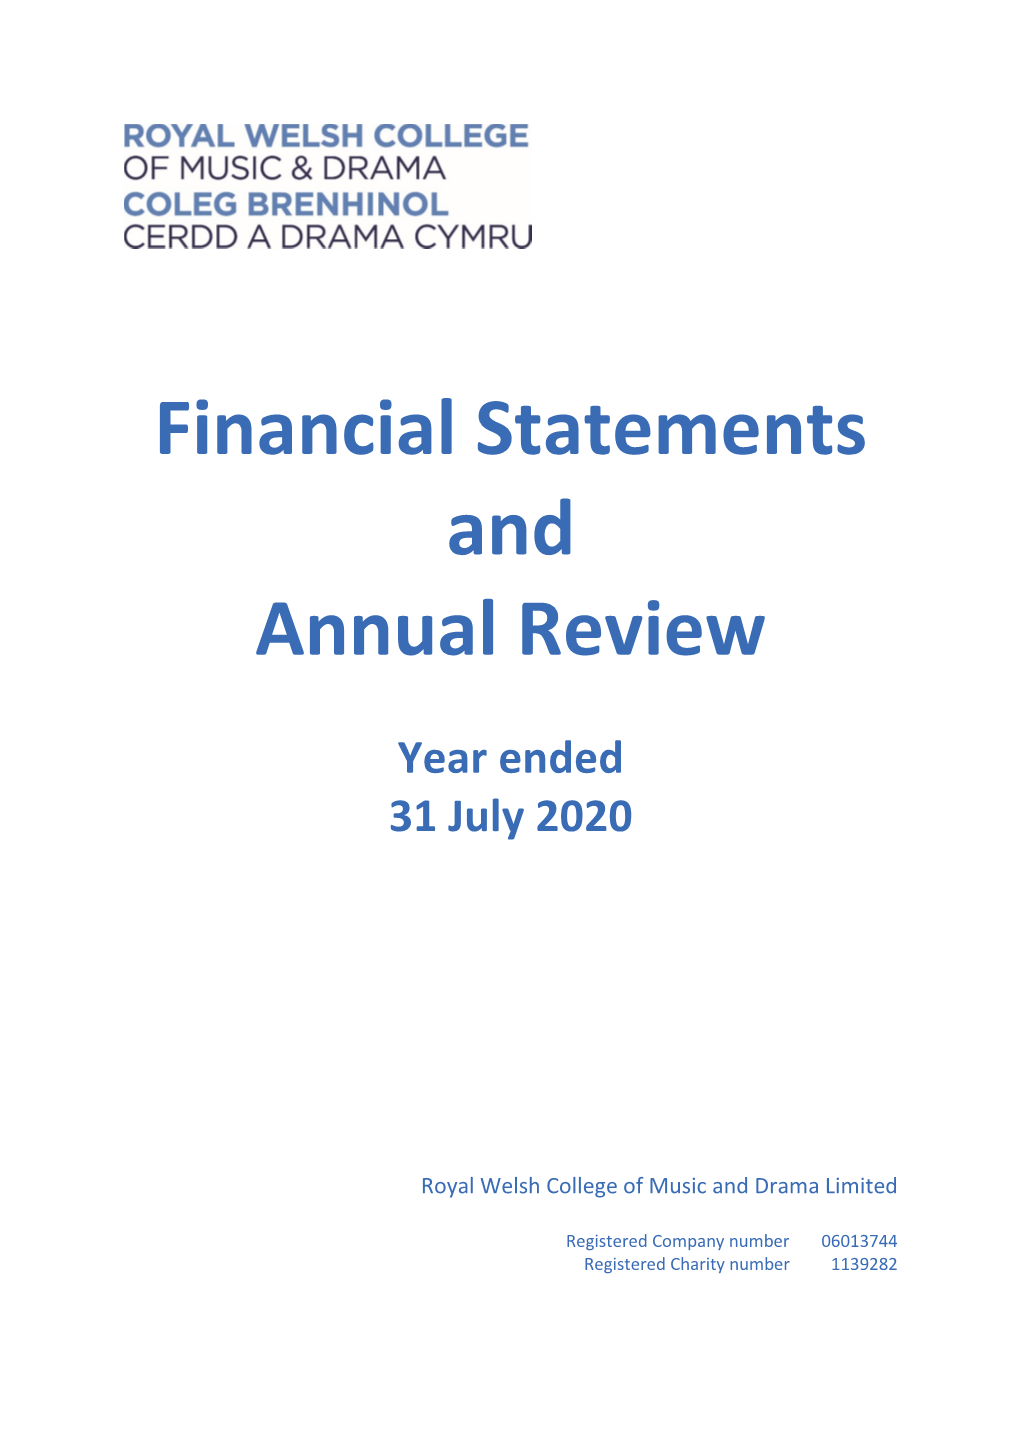 Financial Statements and Annual Review